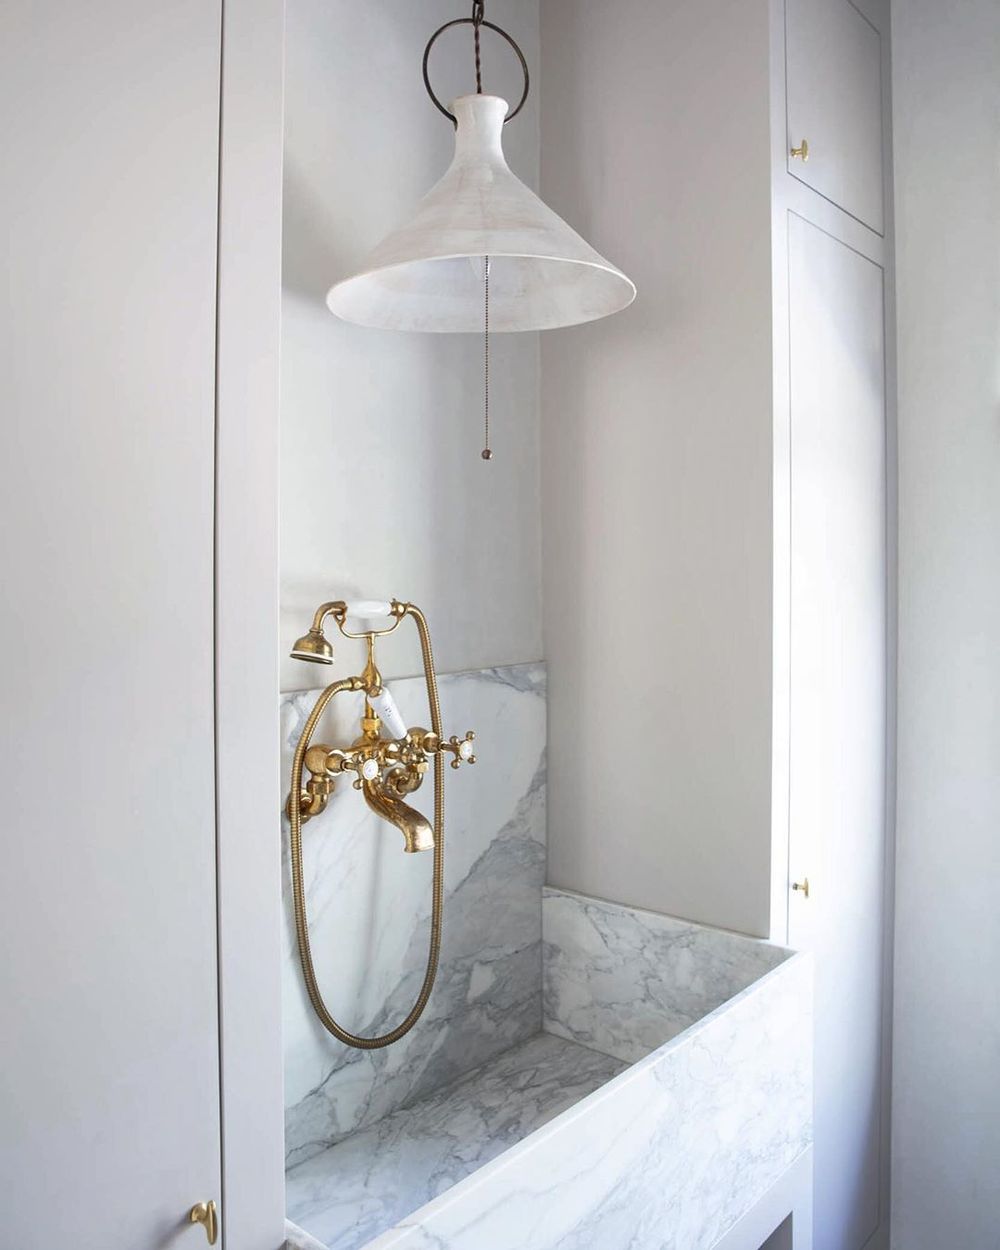 Laundry Room ideas Vintage Style Faucet and Marble Sink via @jilleganinteriors